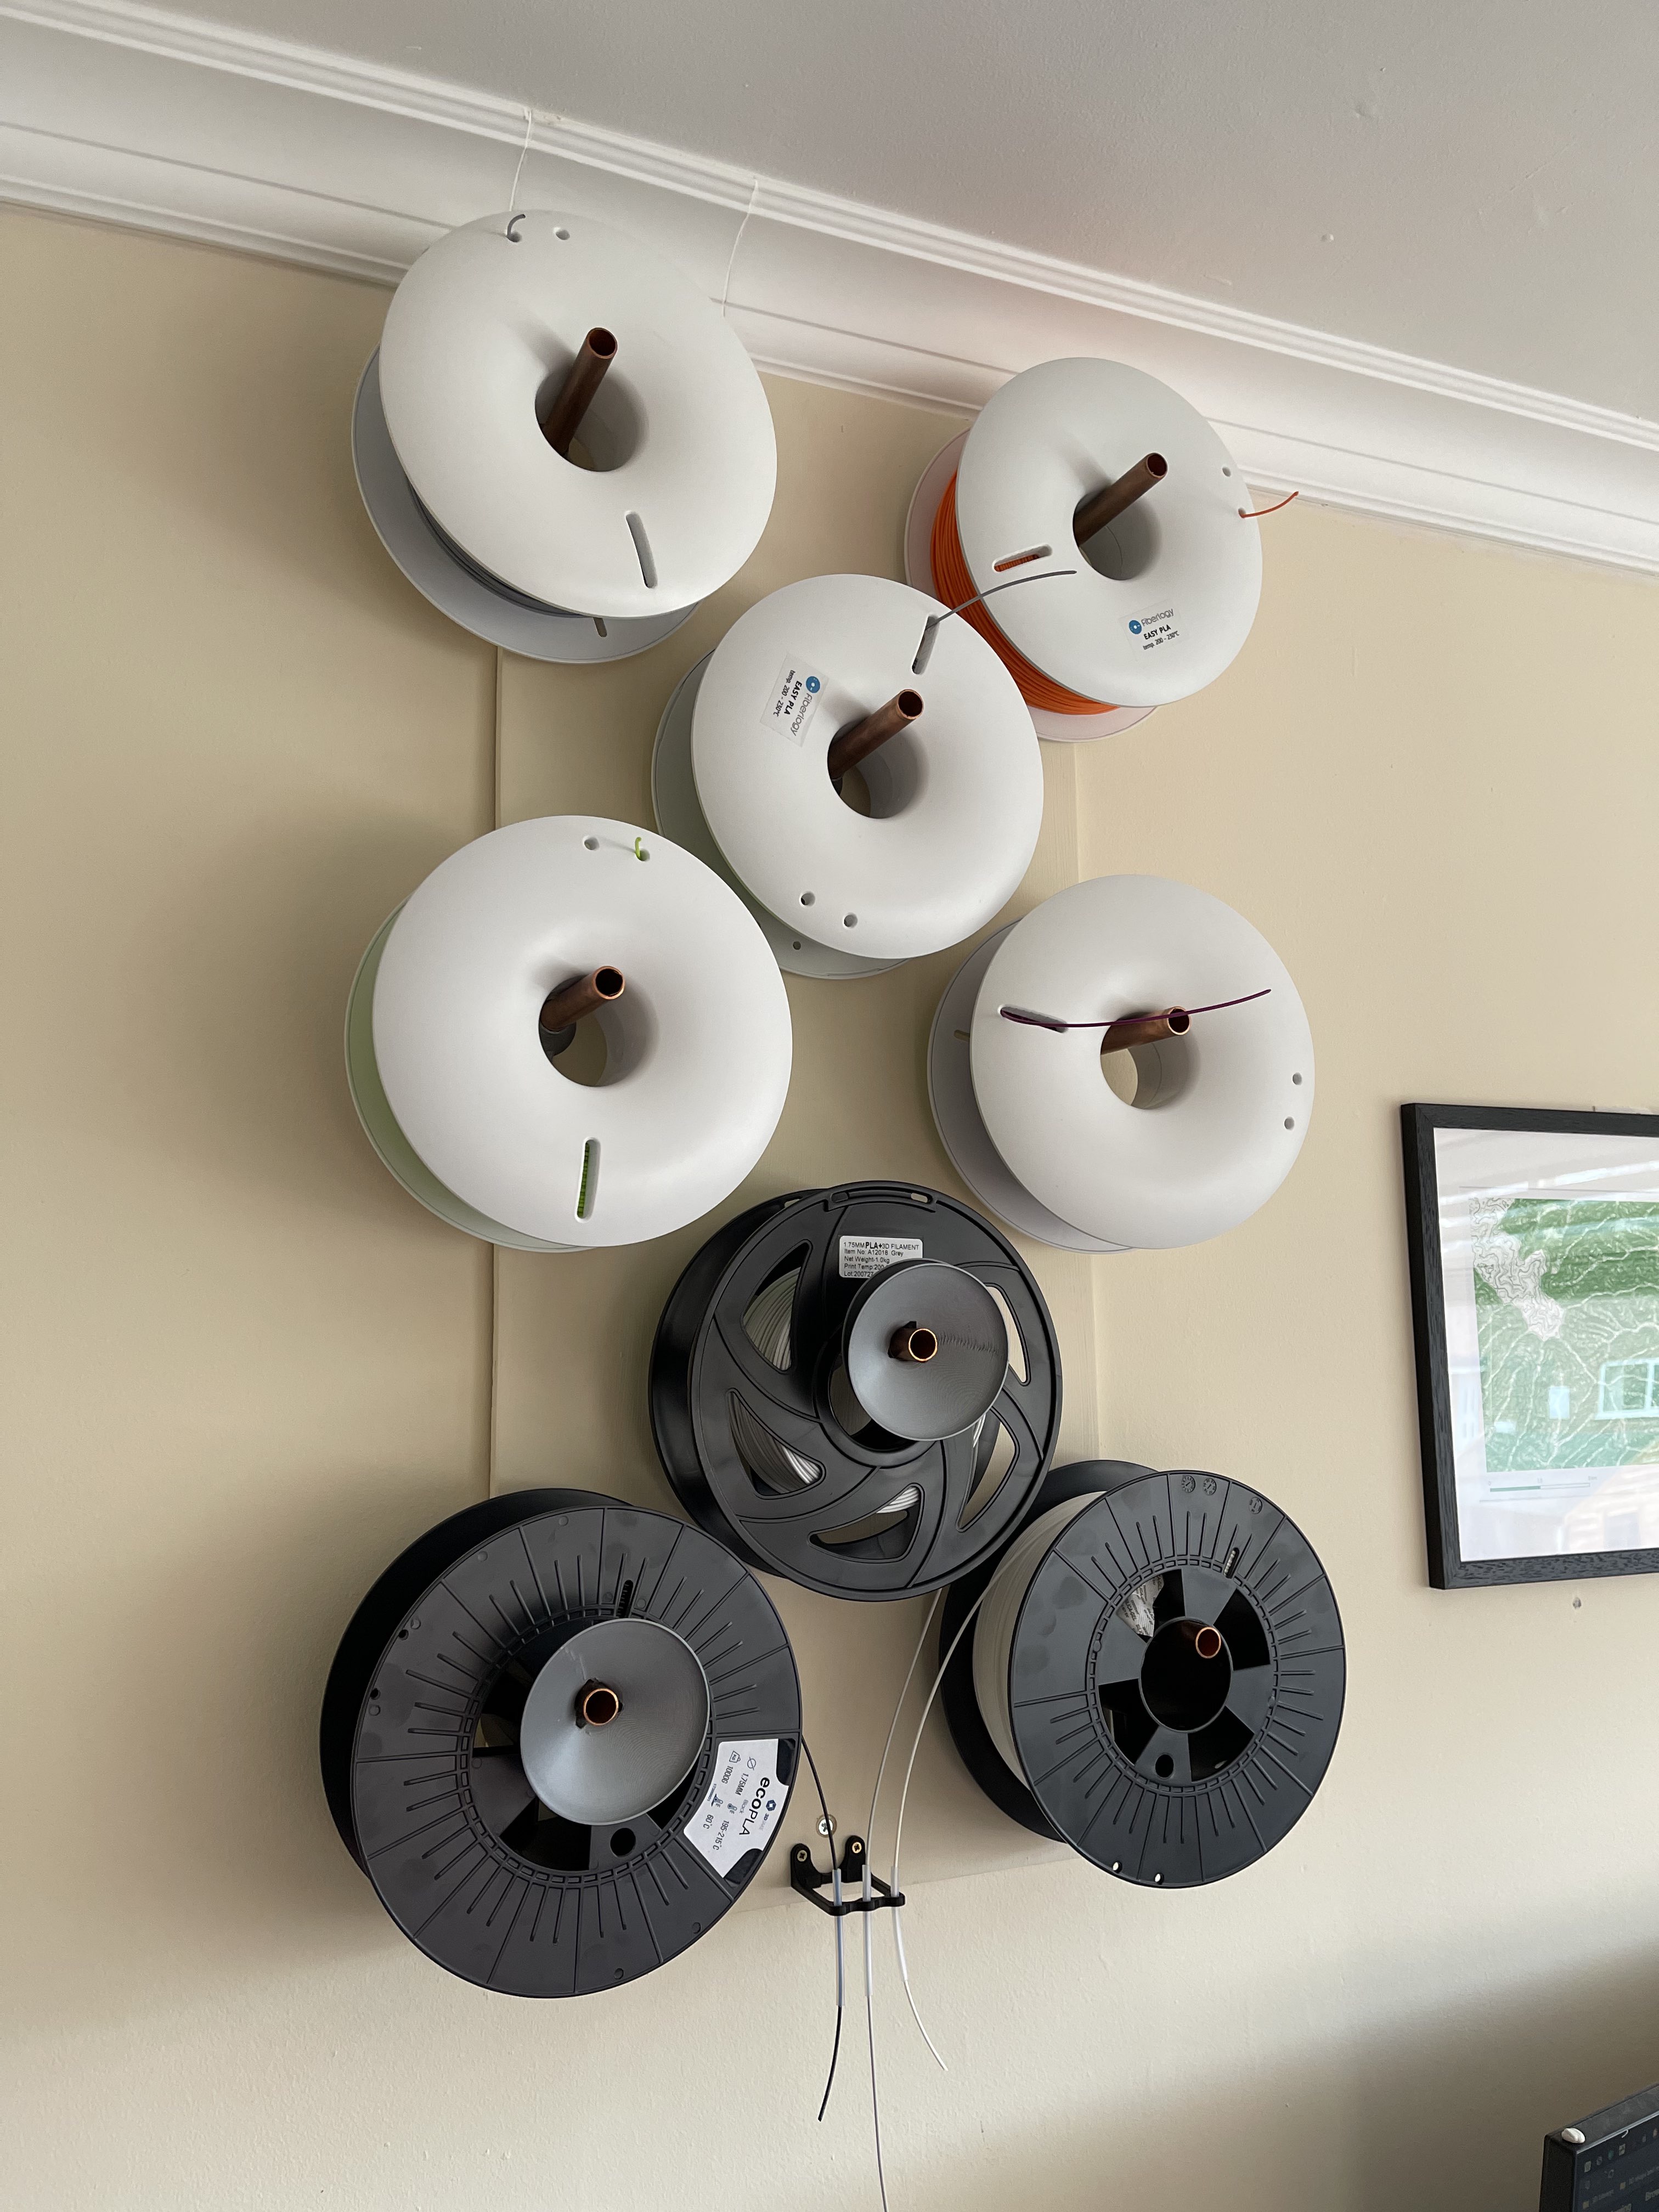 Filament Storage and Feed System - Wall Mounted